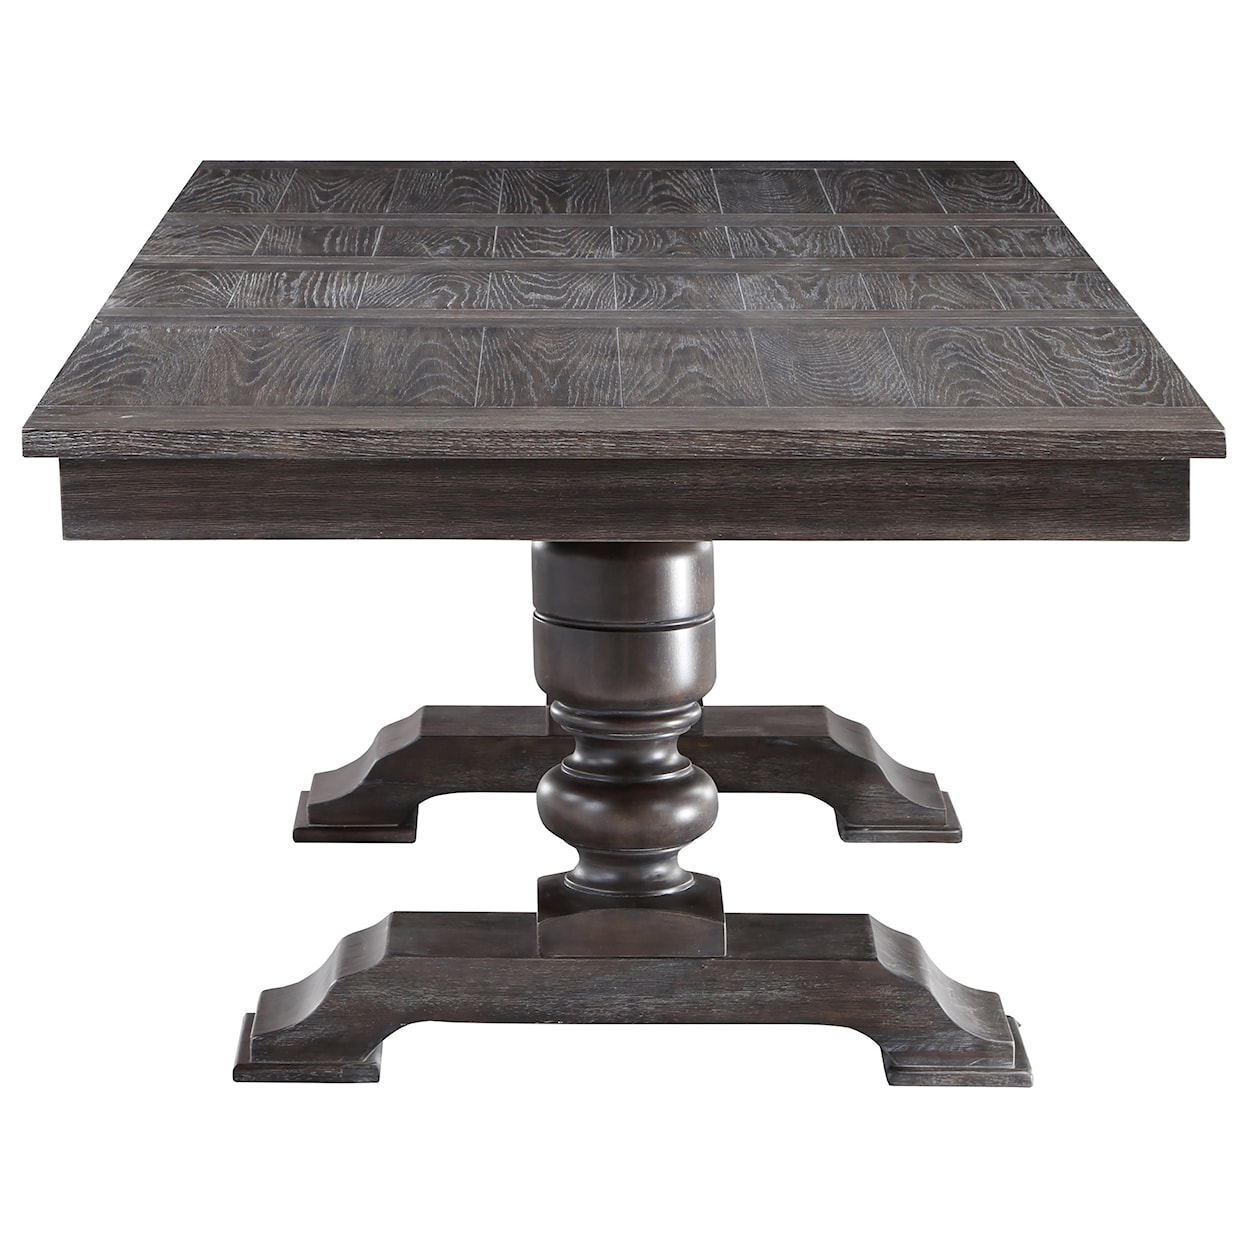 Steve Silver Hutchins Dining Table